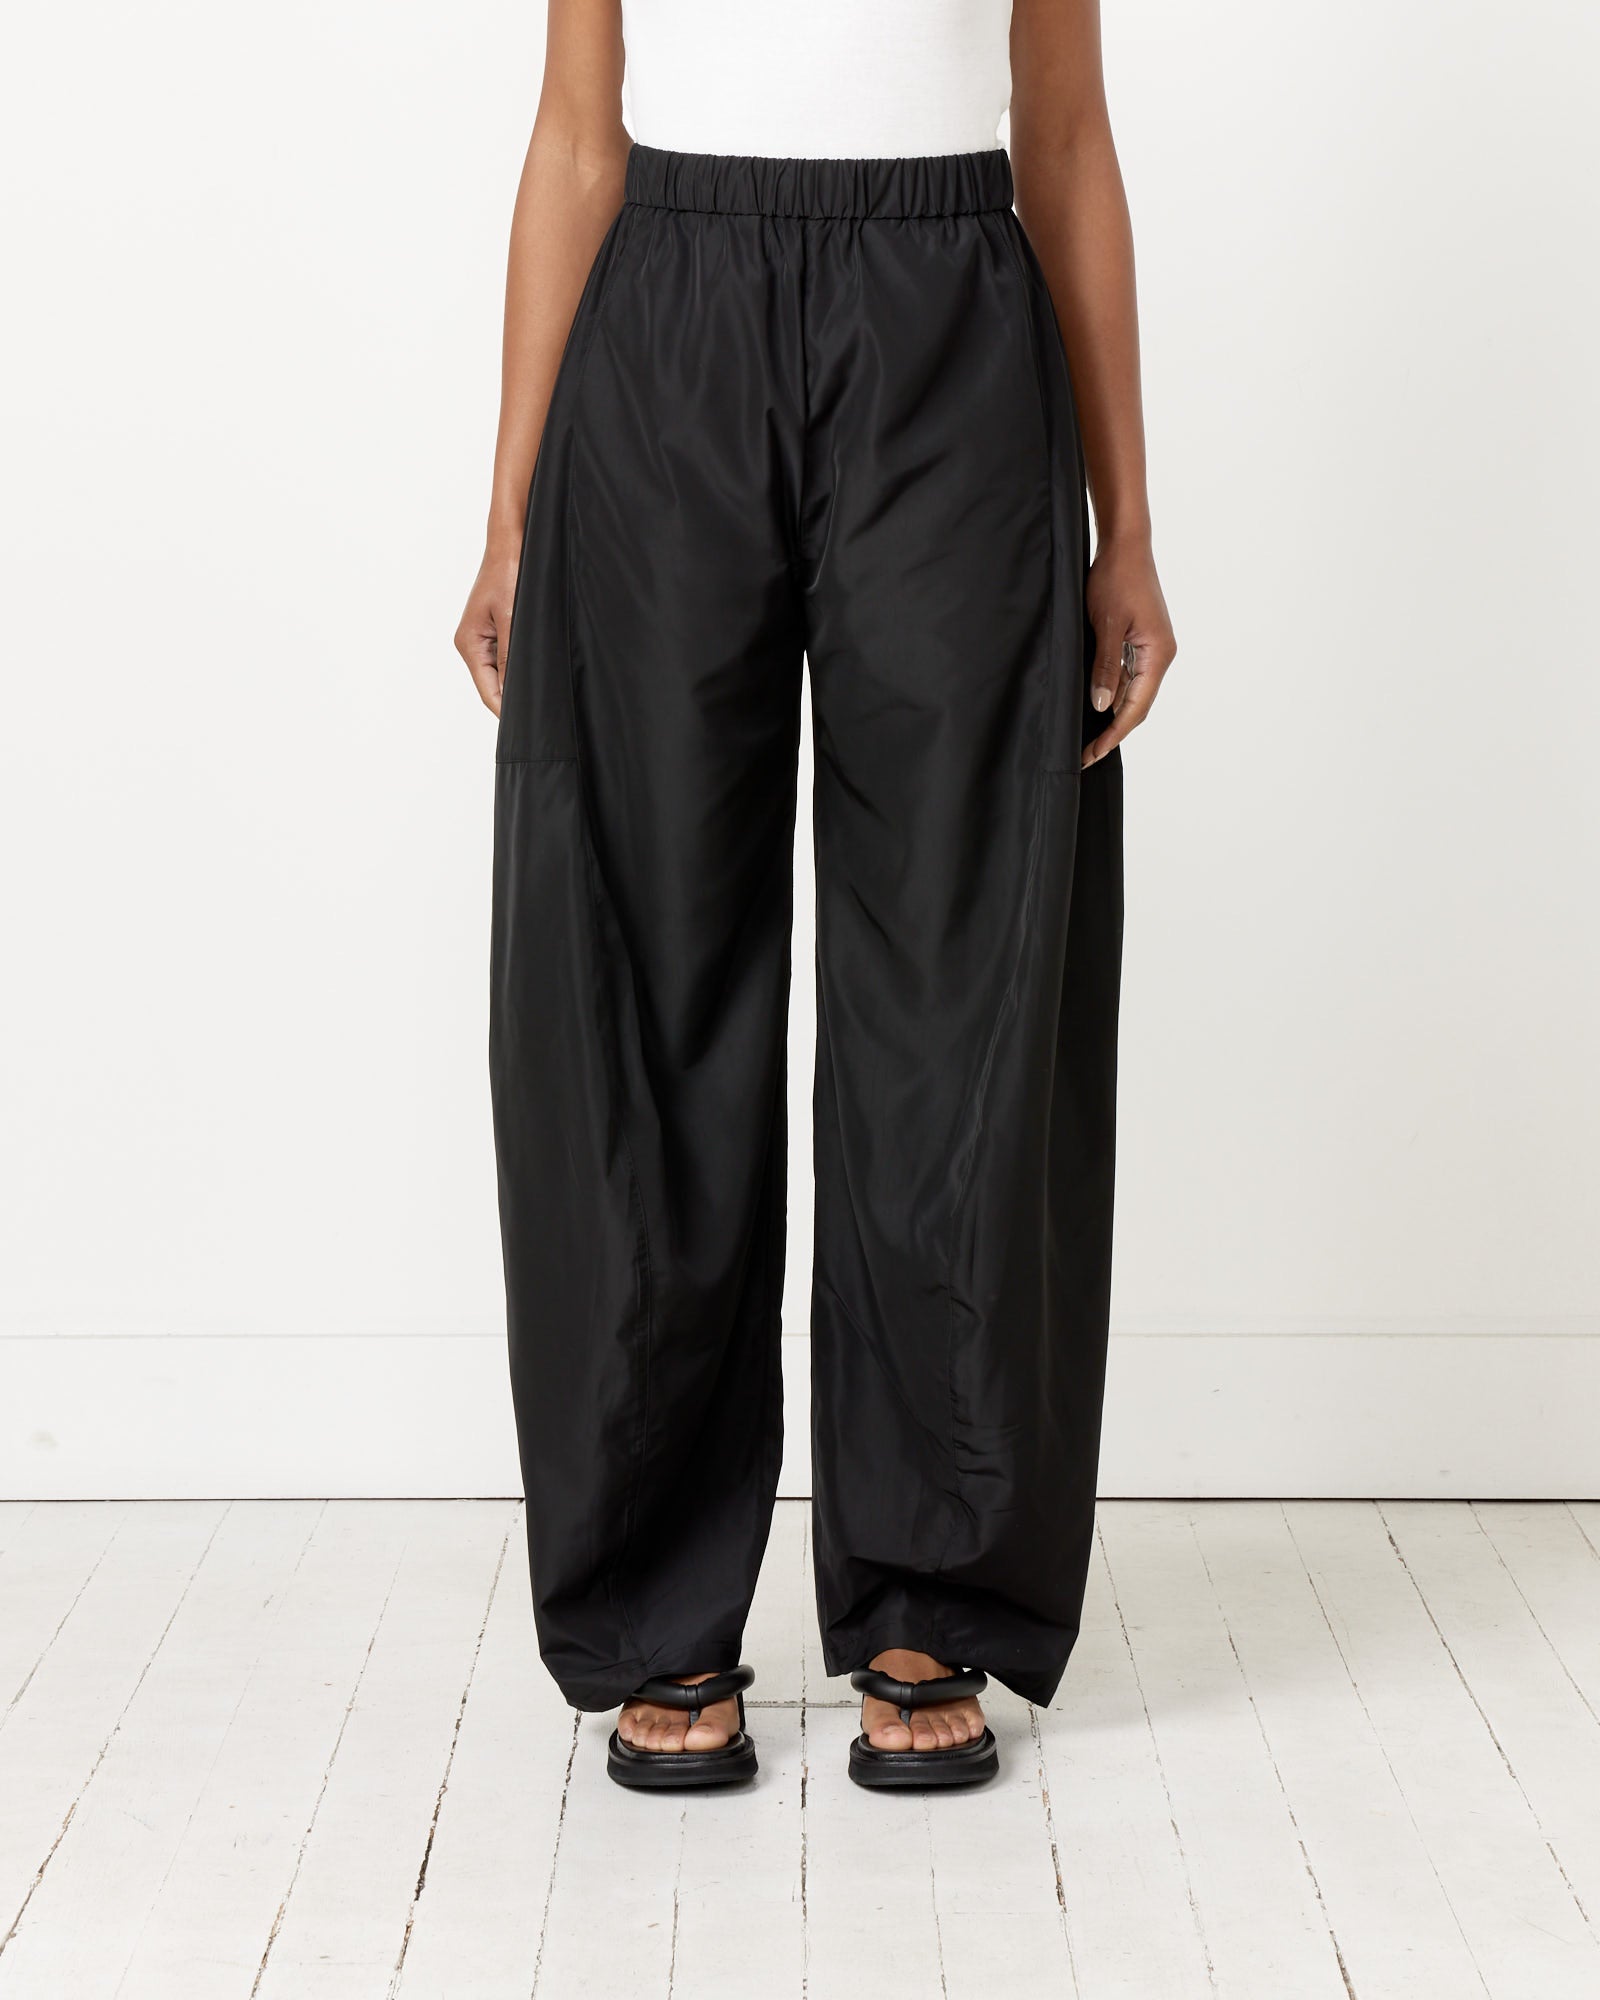 Winslow Pant in Black